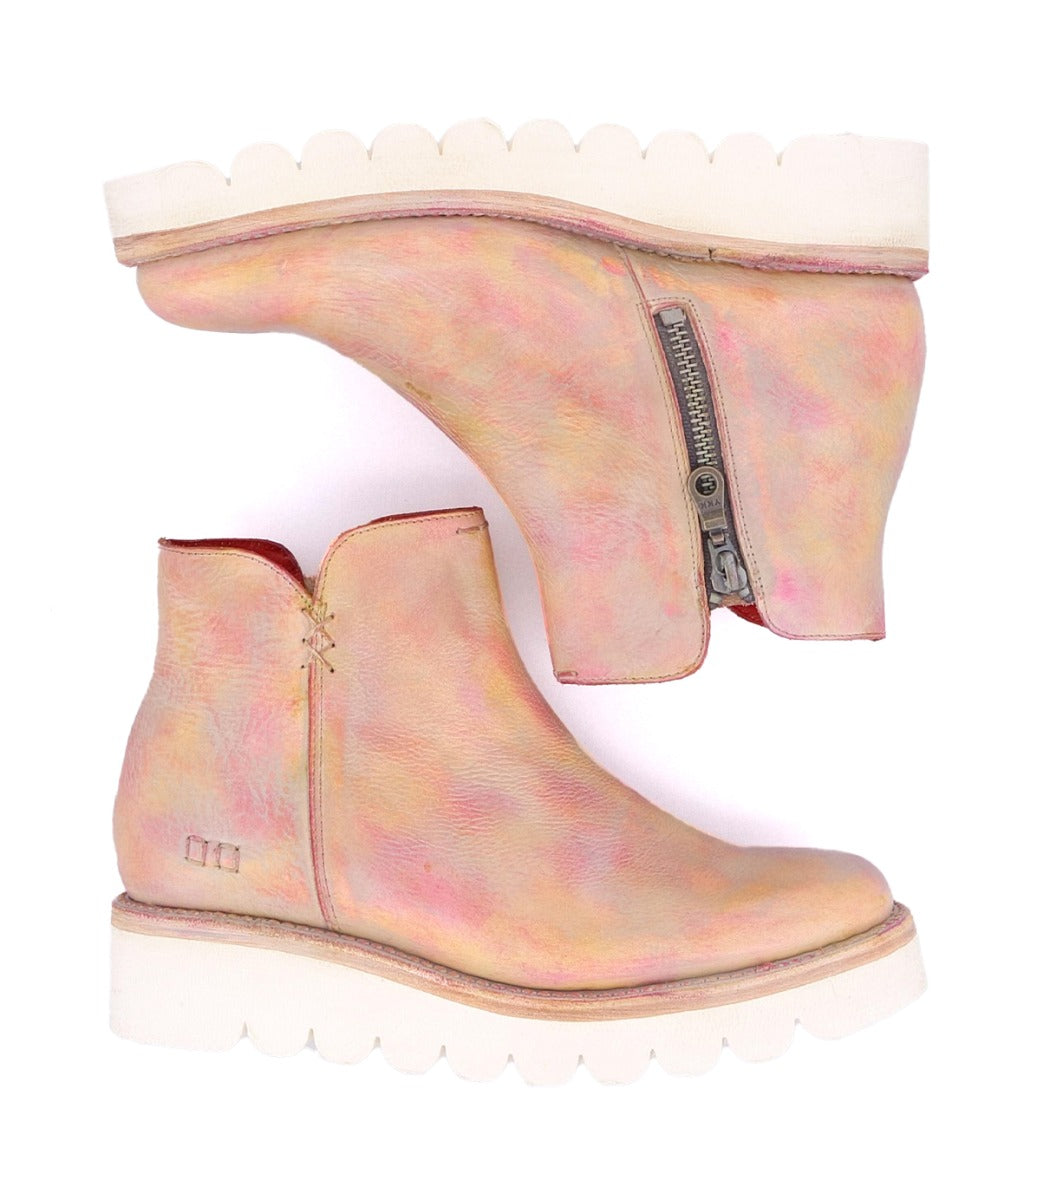 A pair of Bed Stu Lydyi ankle boots in pink and yellow.